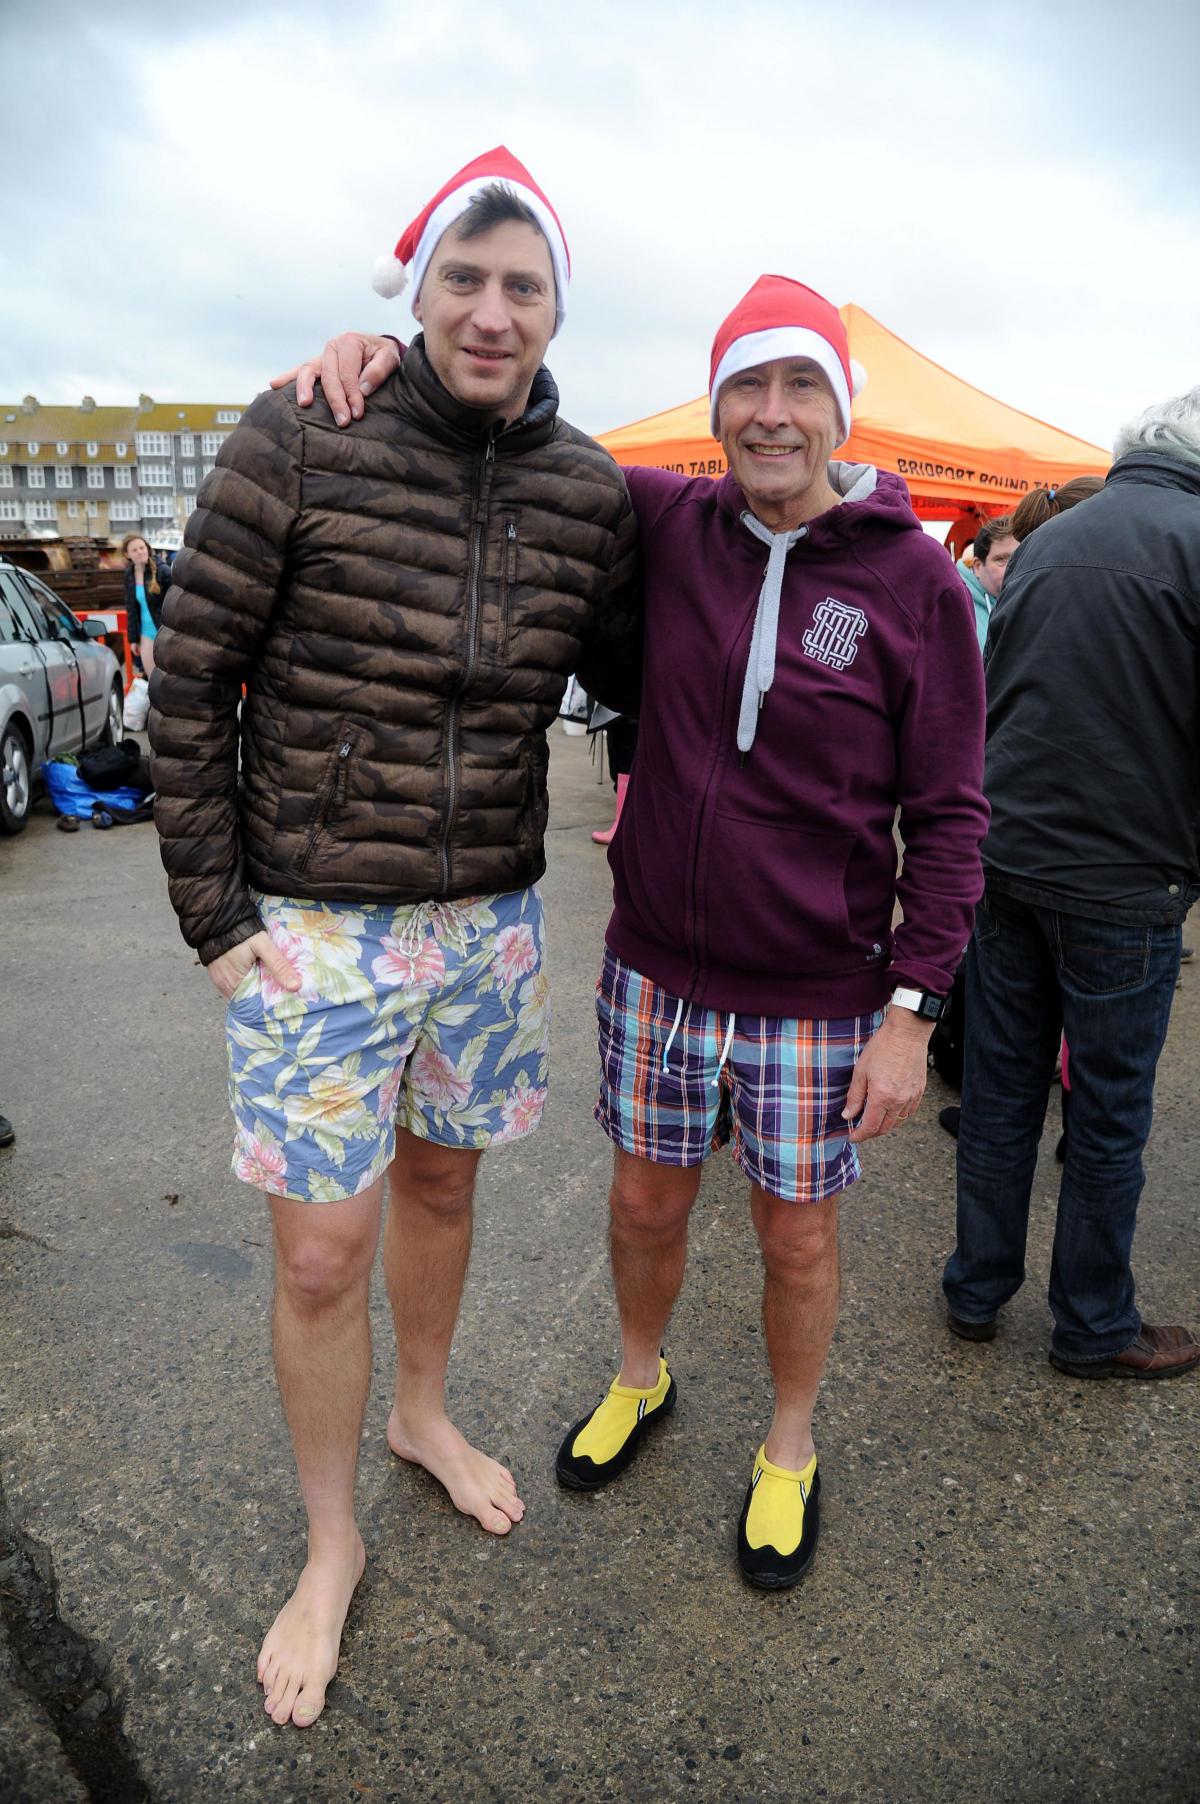 All the photo's from this year's West Bay Wallow